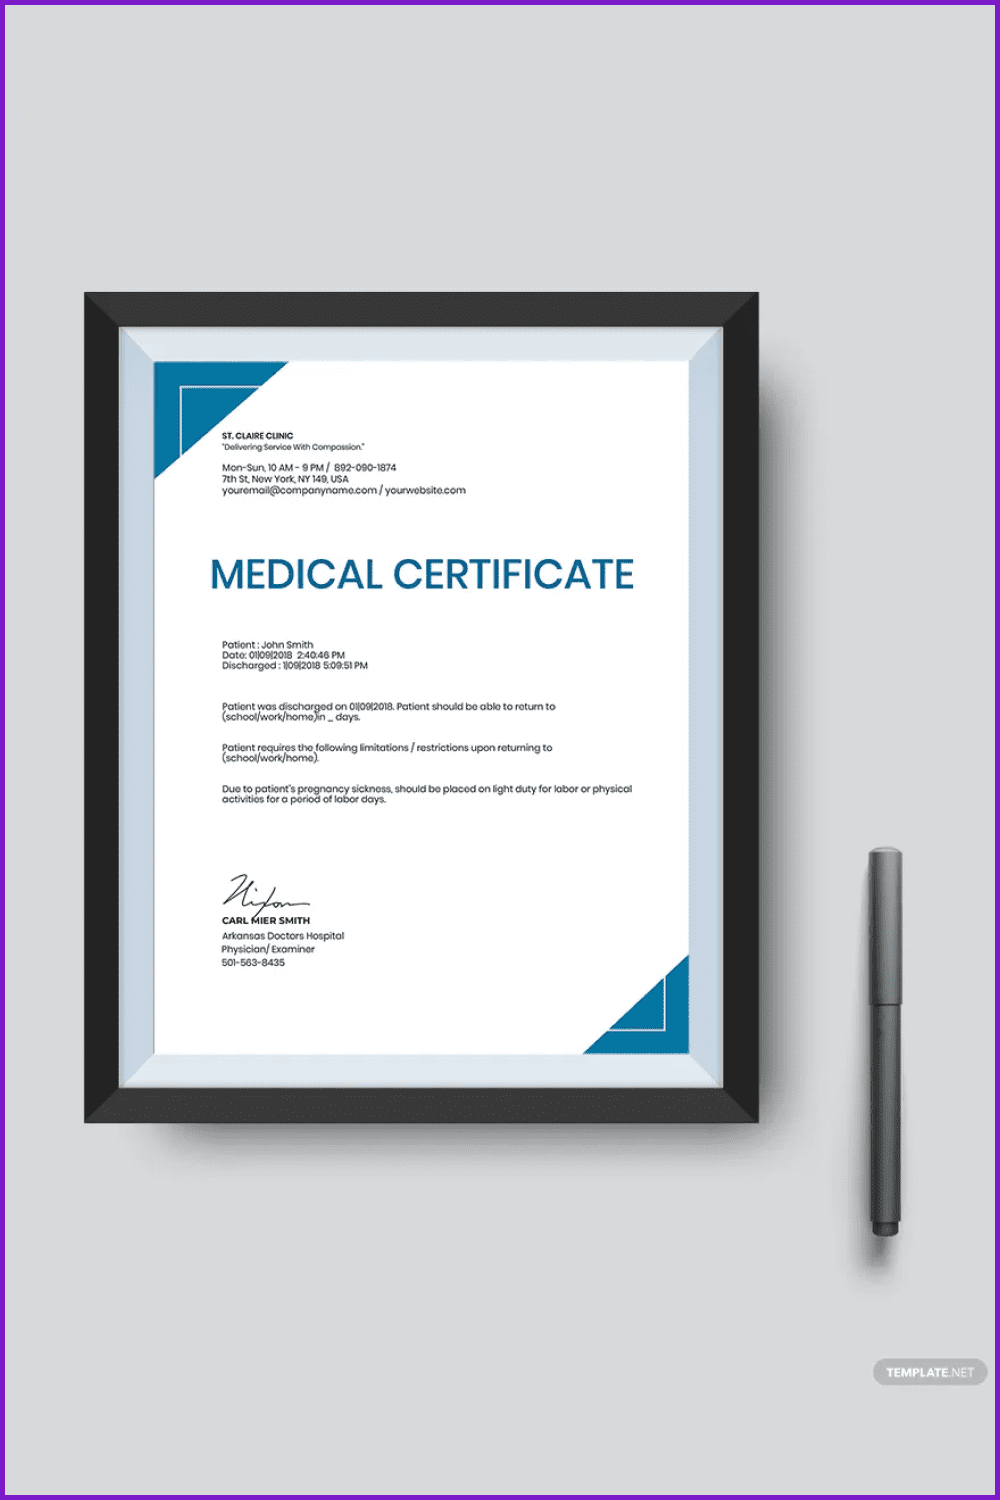 Medical Certificate Template for Pregnancy Sickness.